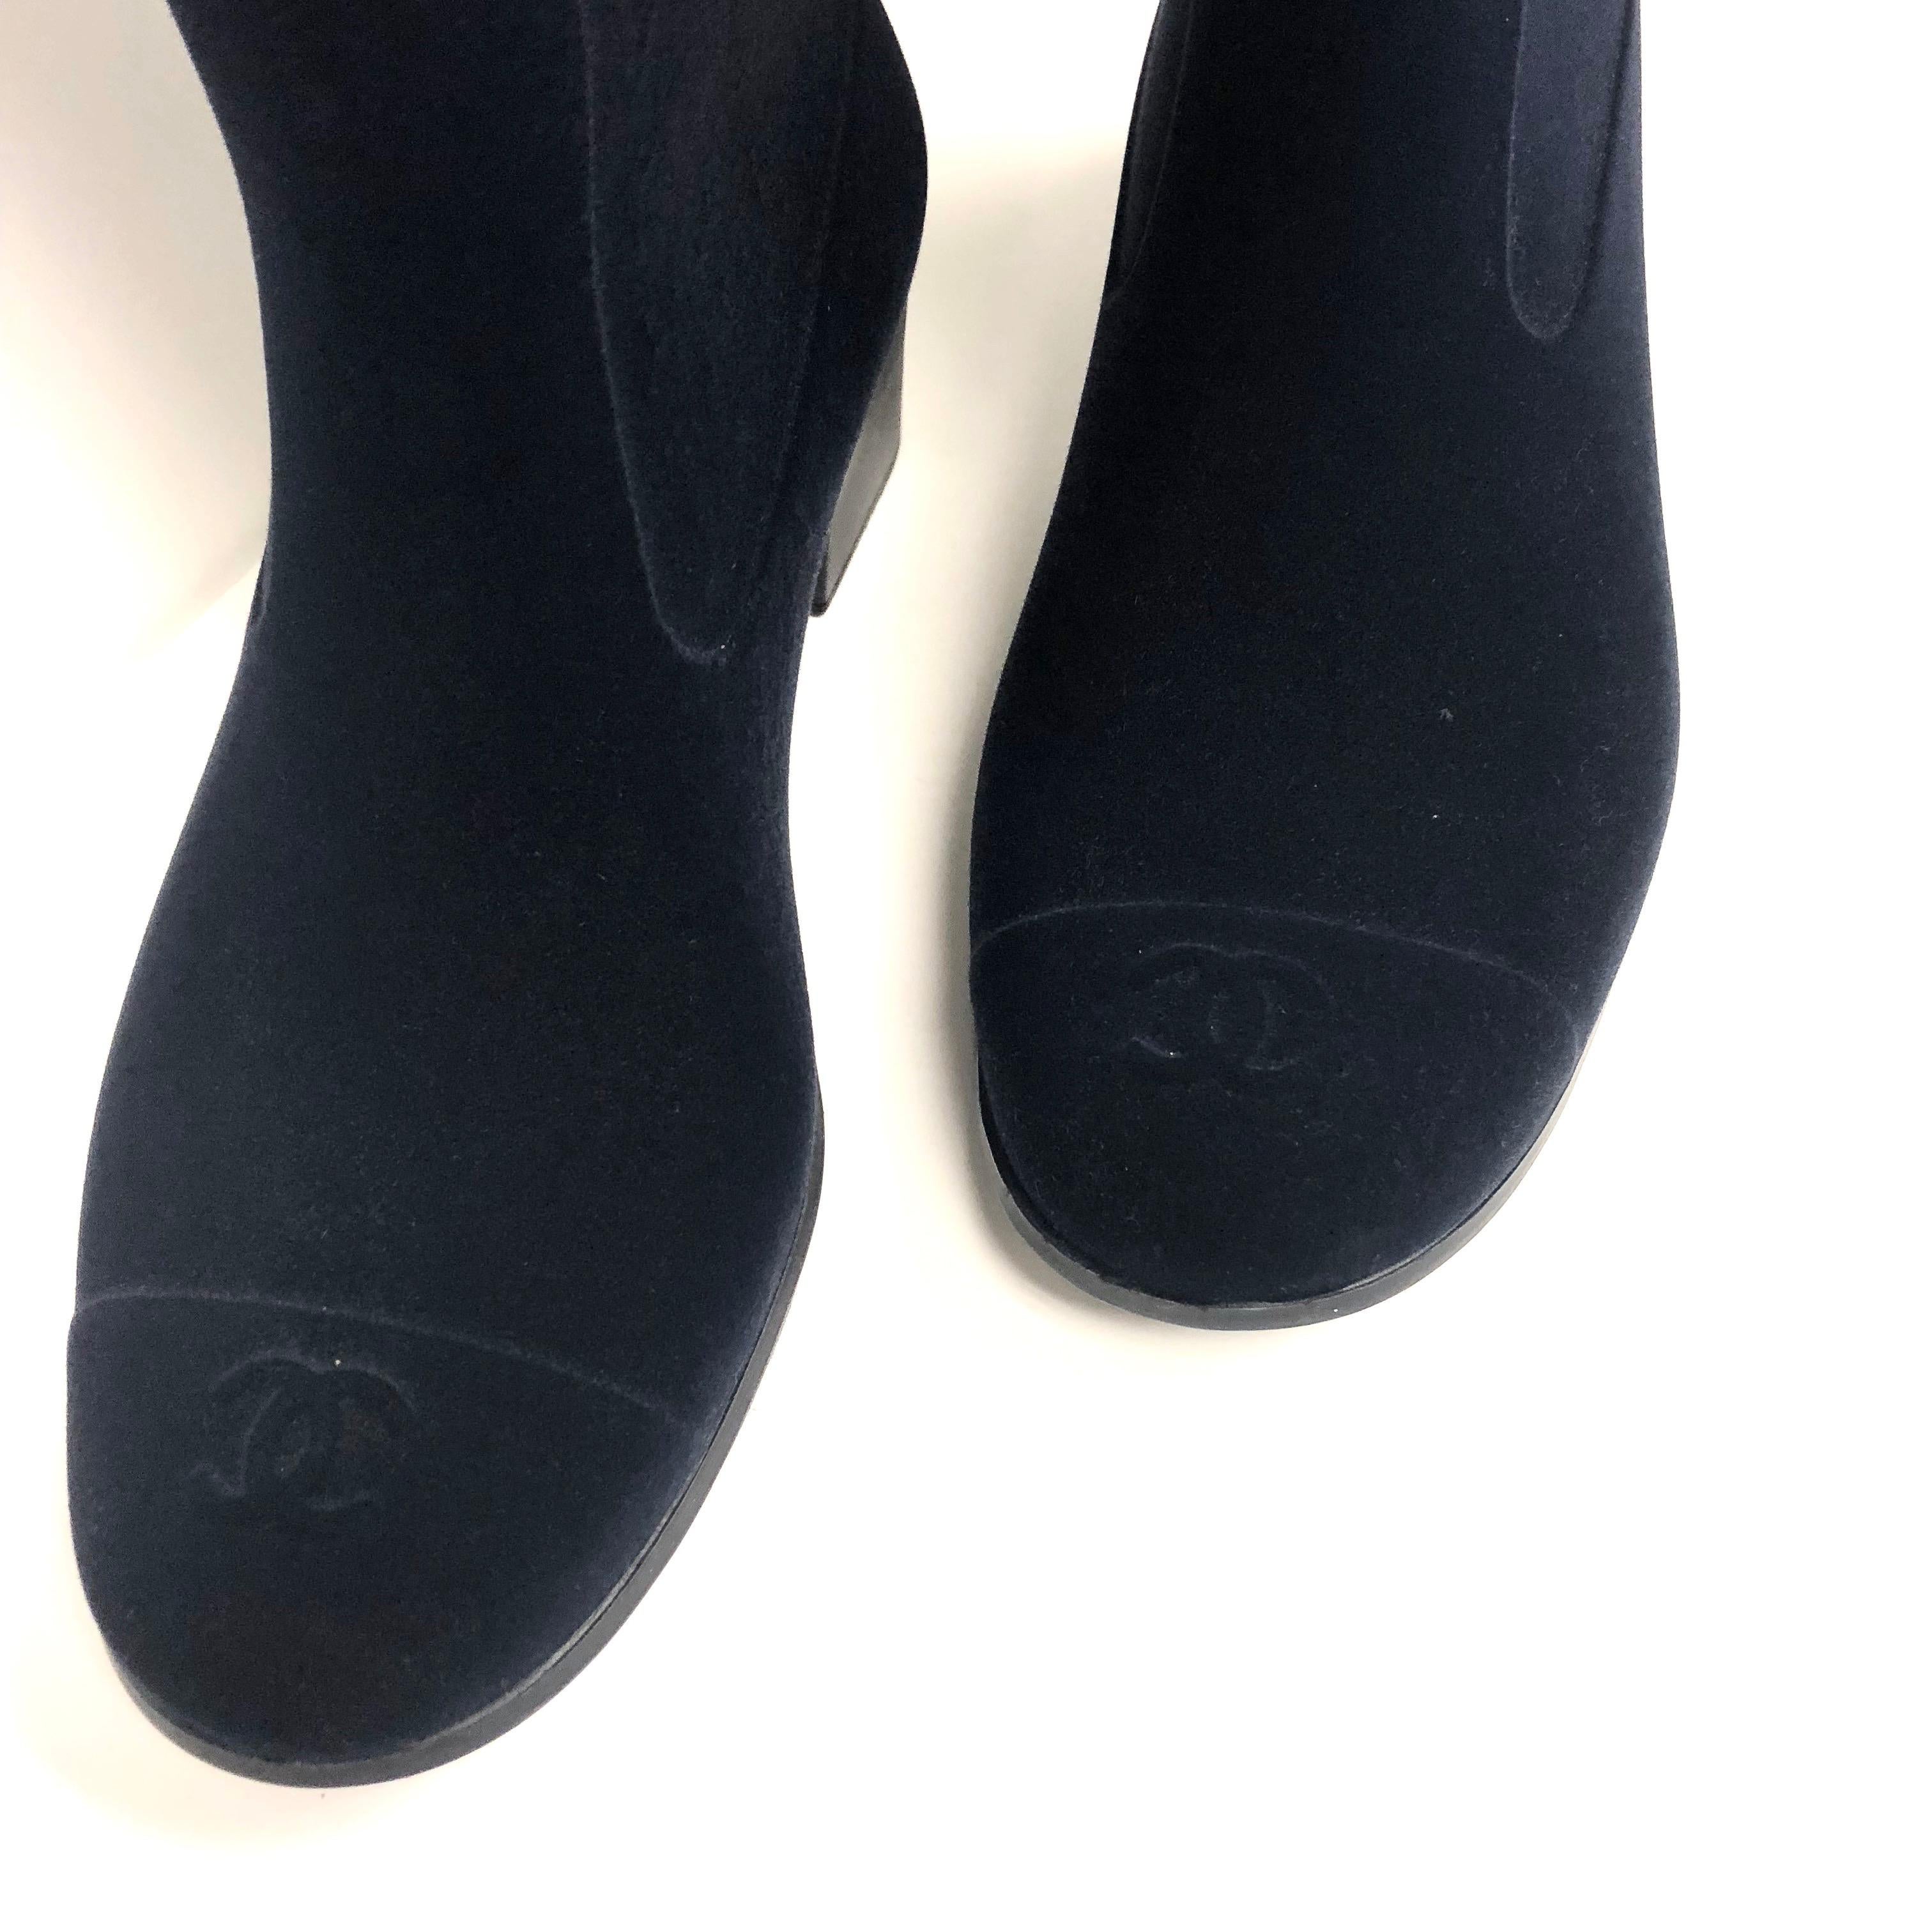 CHANEL dark navy color rain boots with suede like exterior. They are each decorated with two camellias and a gold tone CC logo on the sides. 
Cap toe design removable leather insole. Rubber sole with the Chanel logo embossed.
Heels: 1 1/2